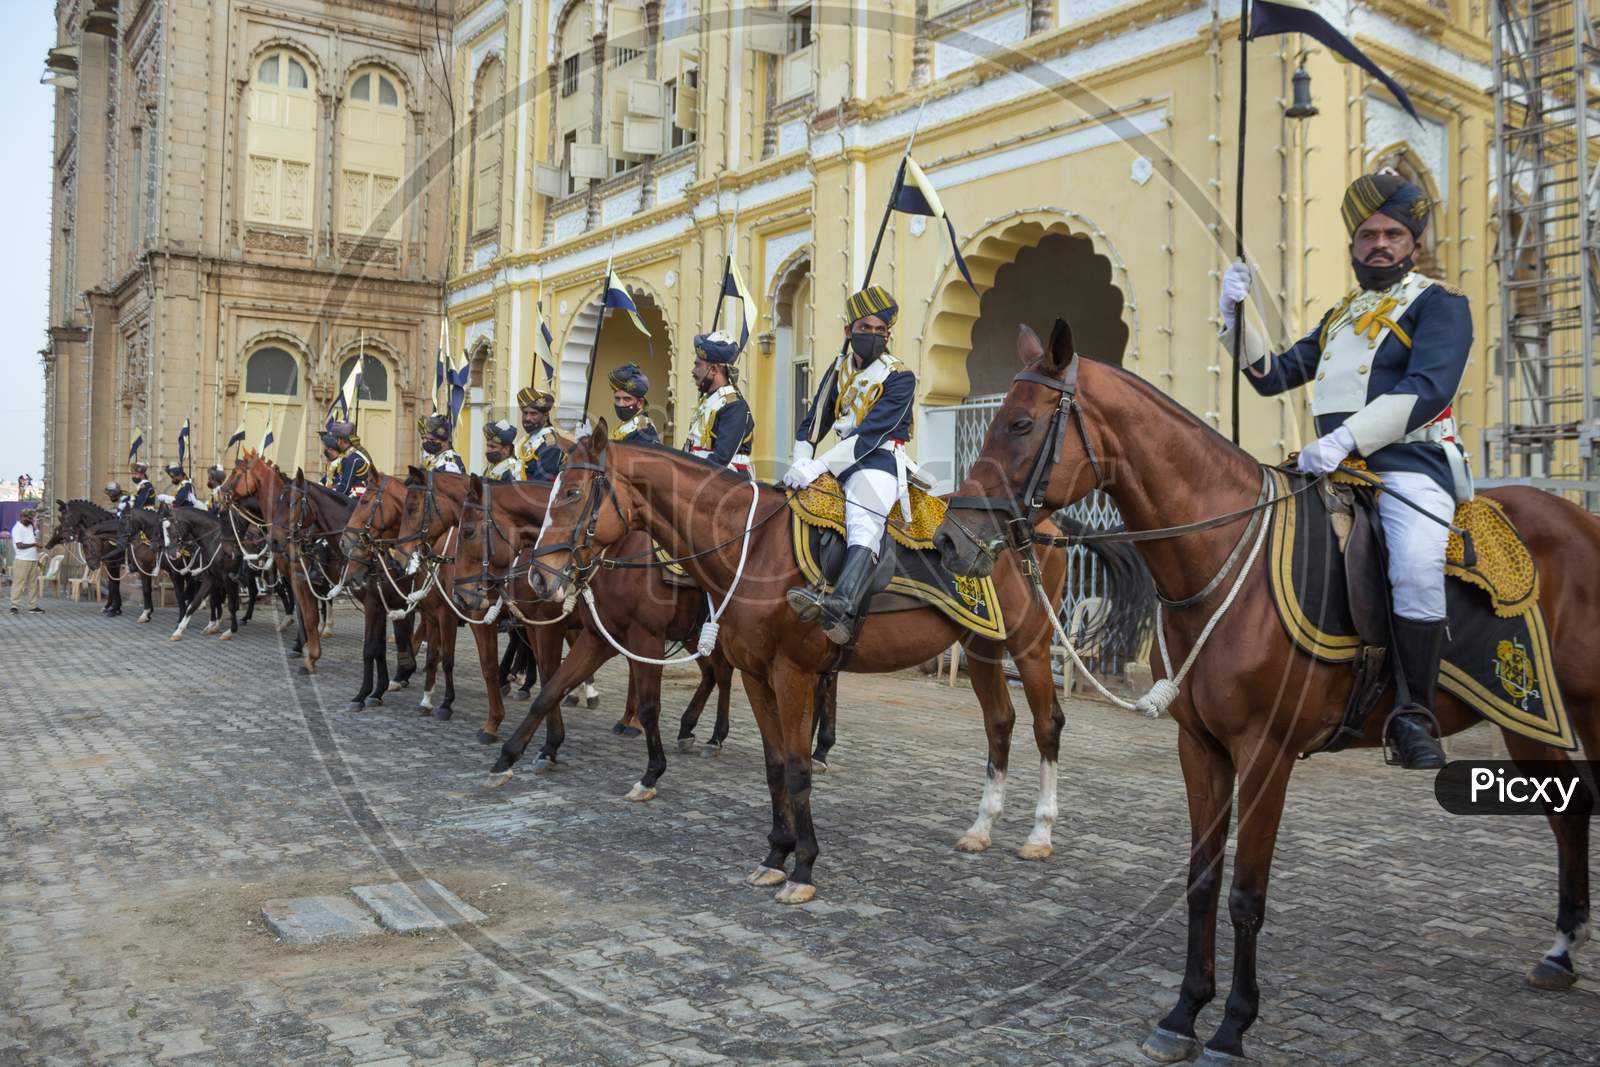 A Battery of Royal Horses lined up with their Horsemen with the Flags for the Dasara Procession at Amba Vilas Palace in Mysore of Karnataka/India.